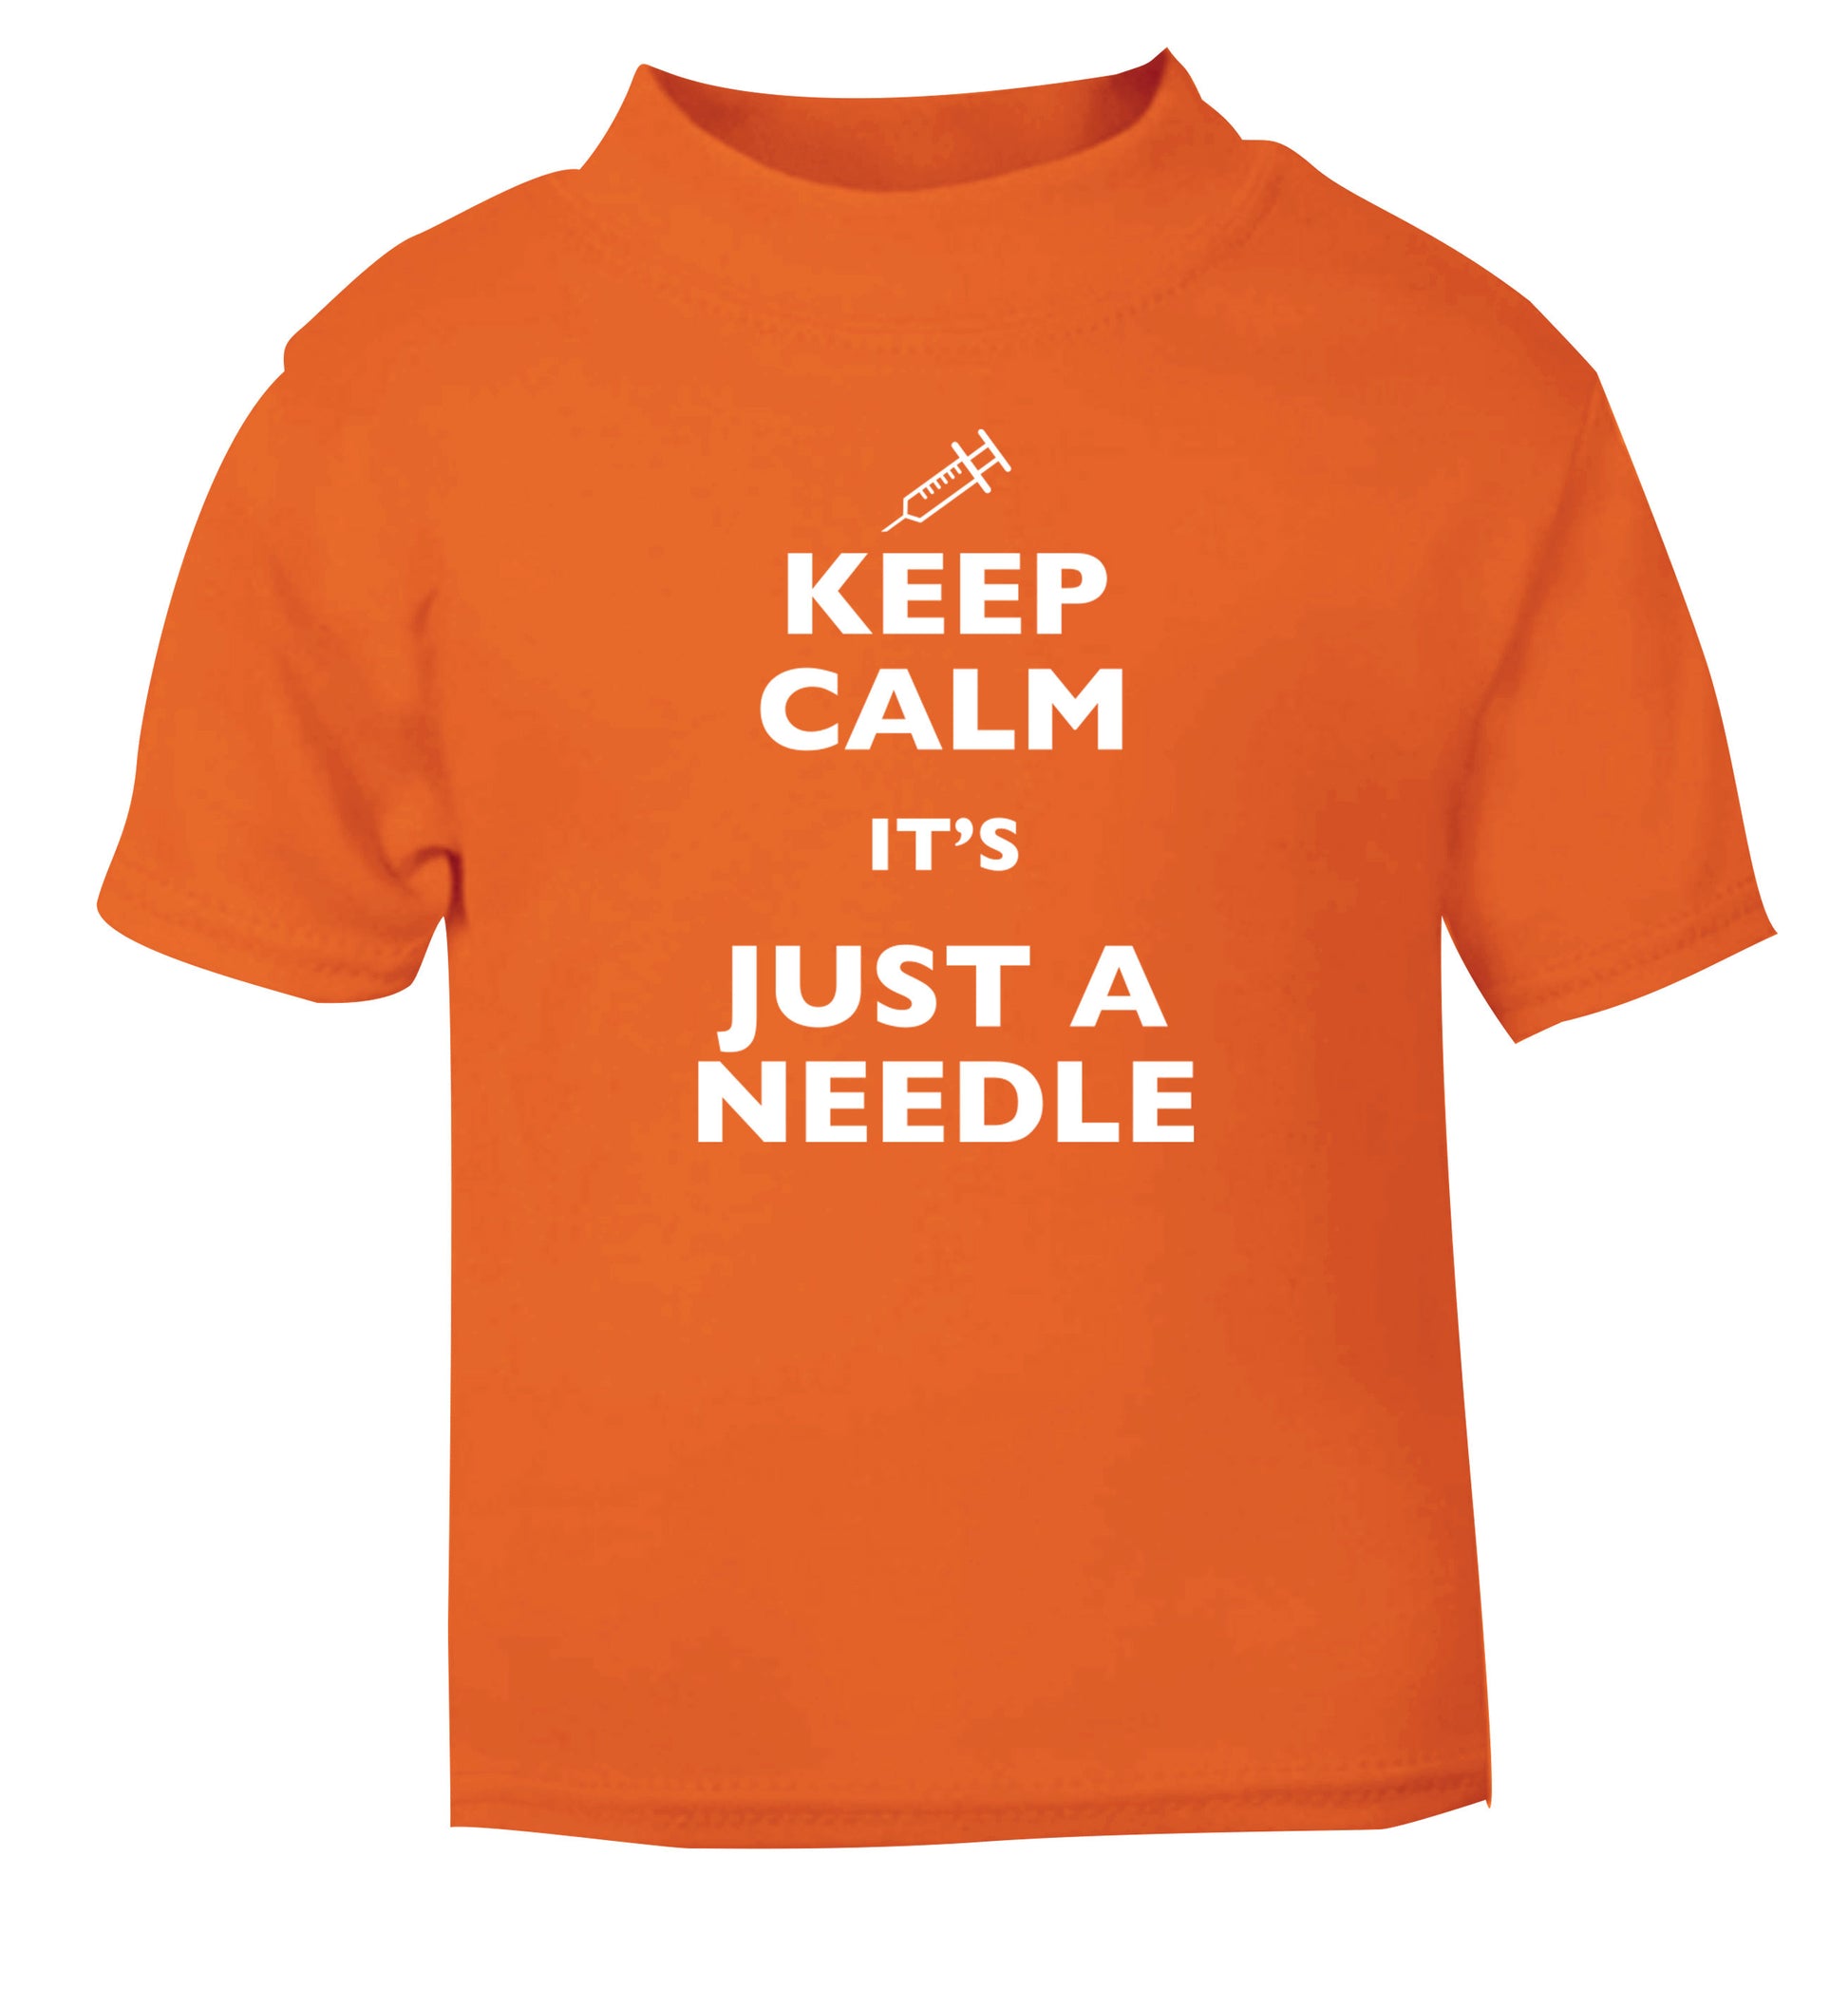 Keep calm it's only a needle orange Baby Toddler Tshirt 2 Years